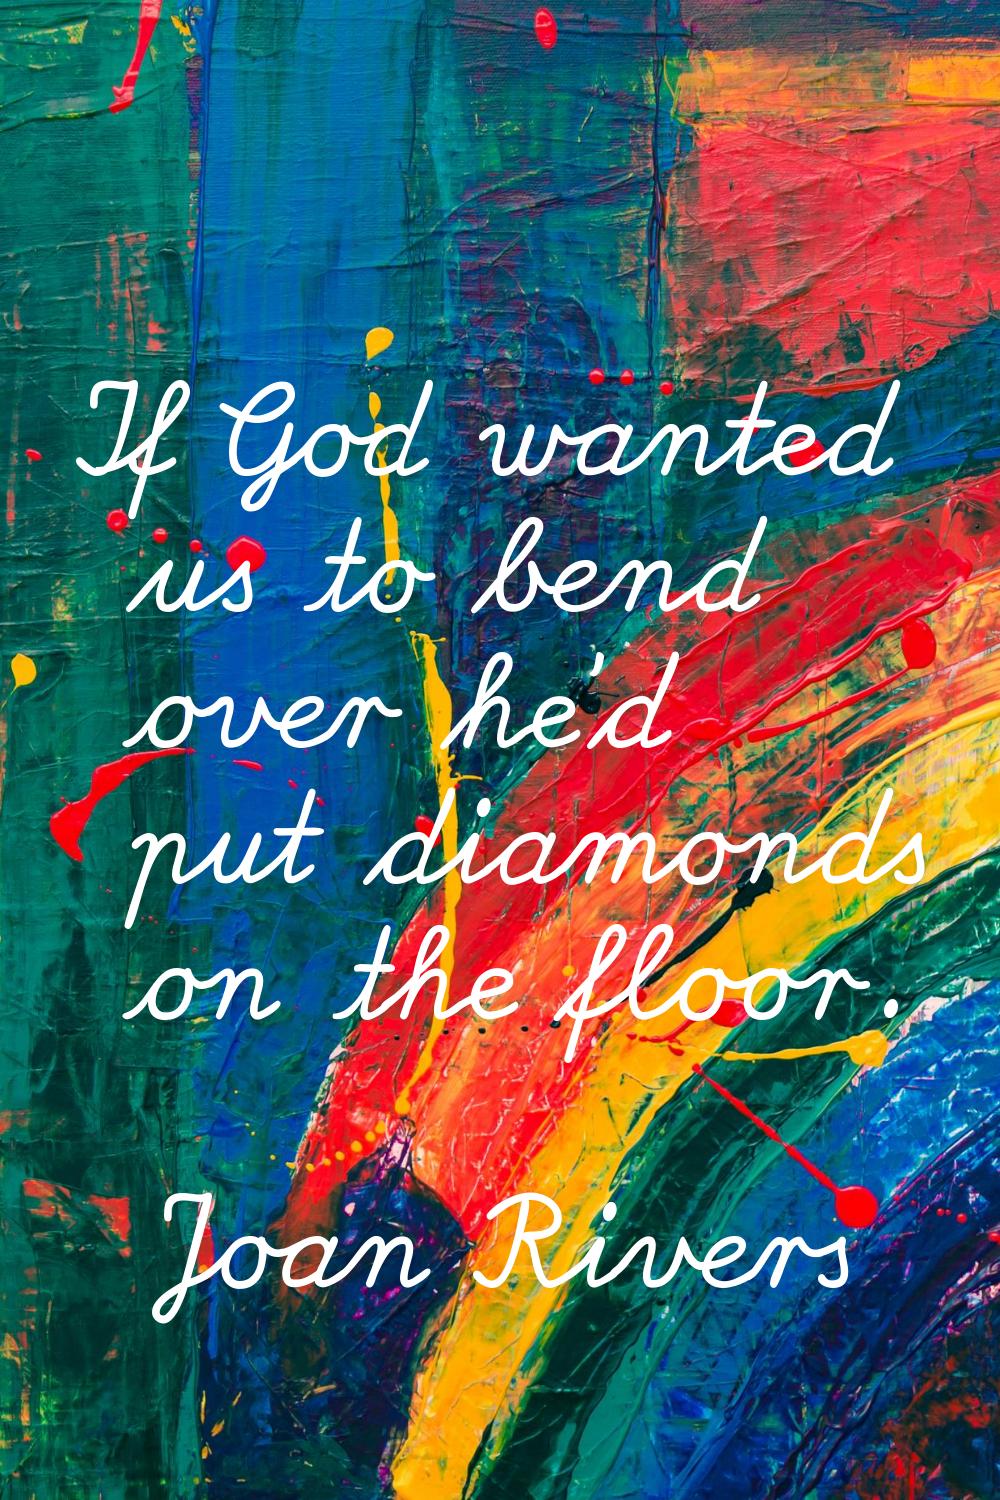 If God wanted us to bend over he'd put diamonds on the floor.